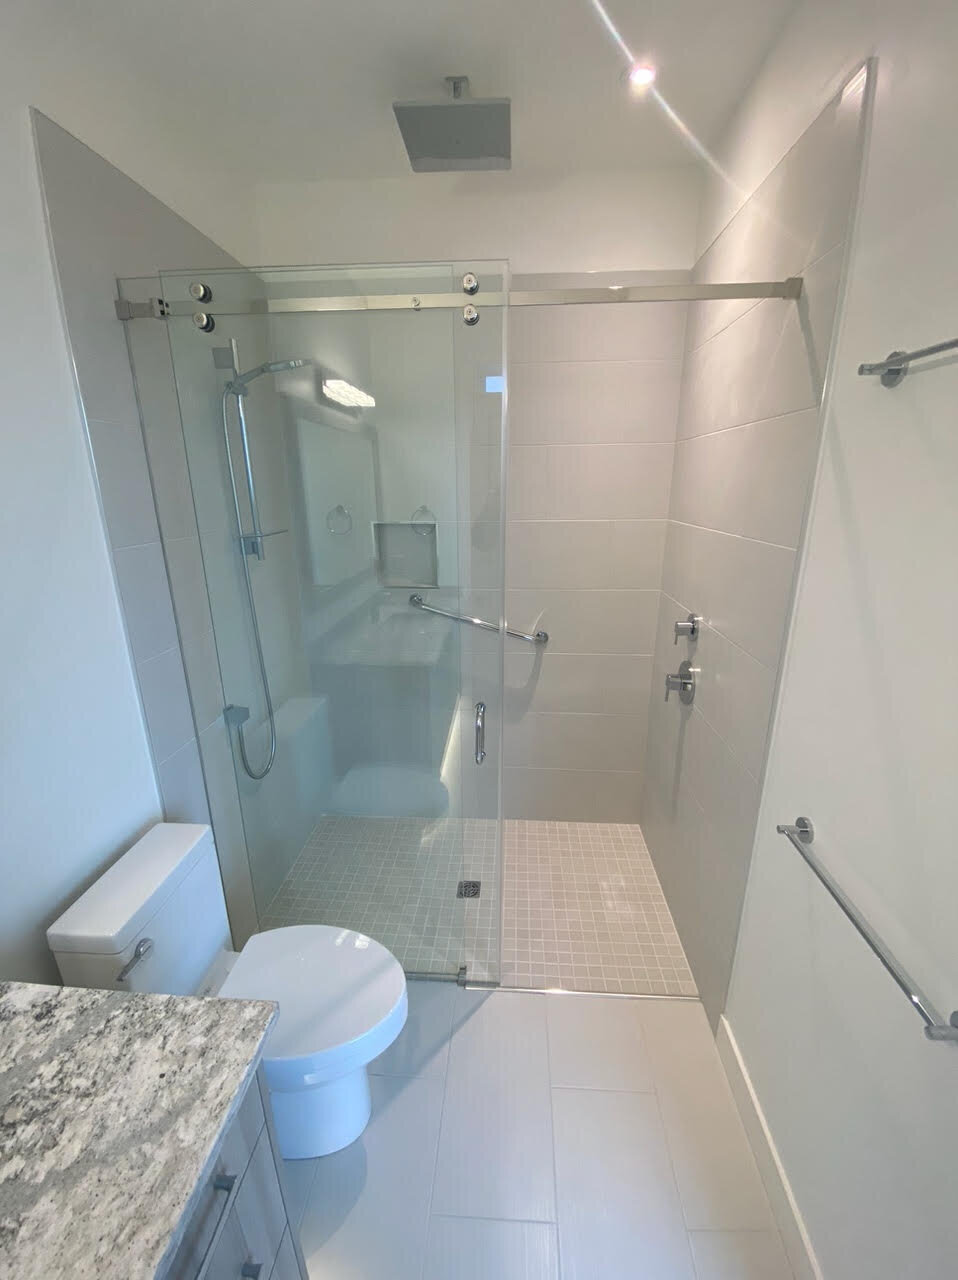 Contemporary bathroom design with walk in shower, handrail, stainless fixtures.